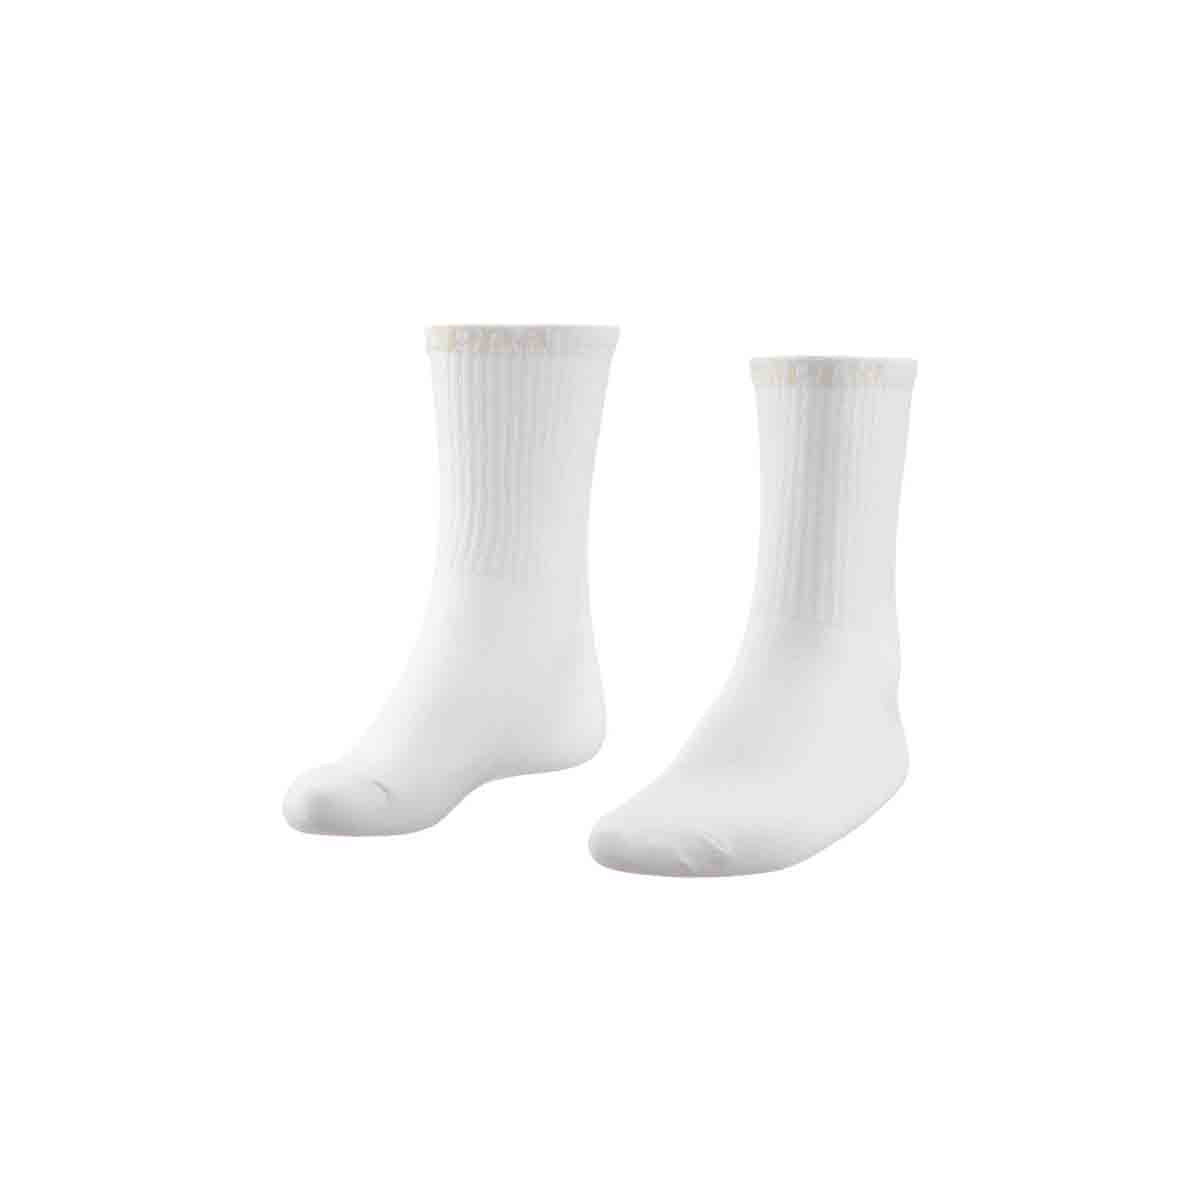 Calcetines Authentic Atel 3Pack Marrón